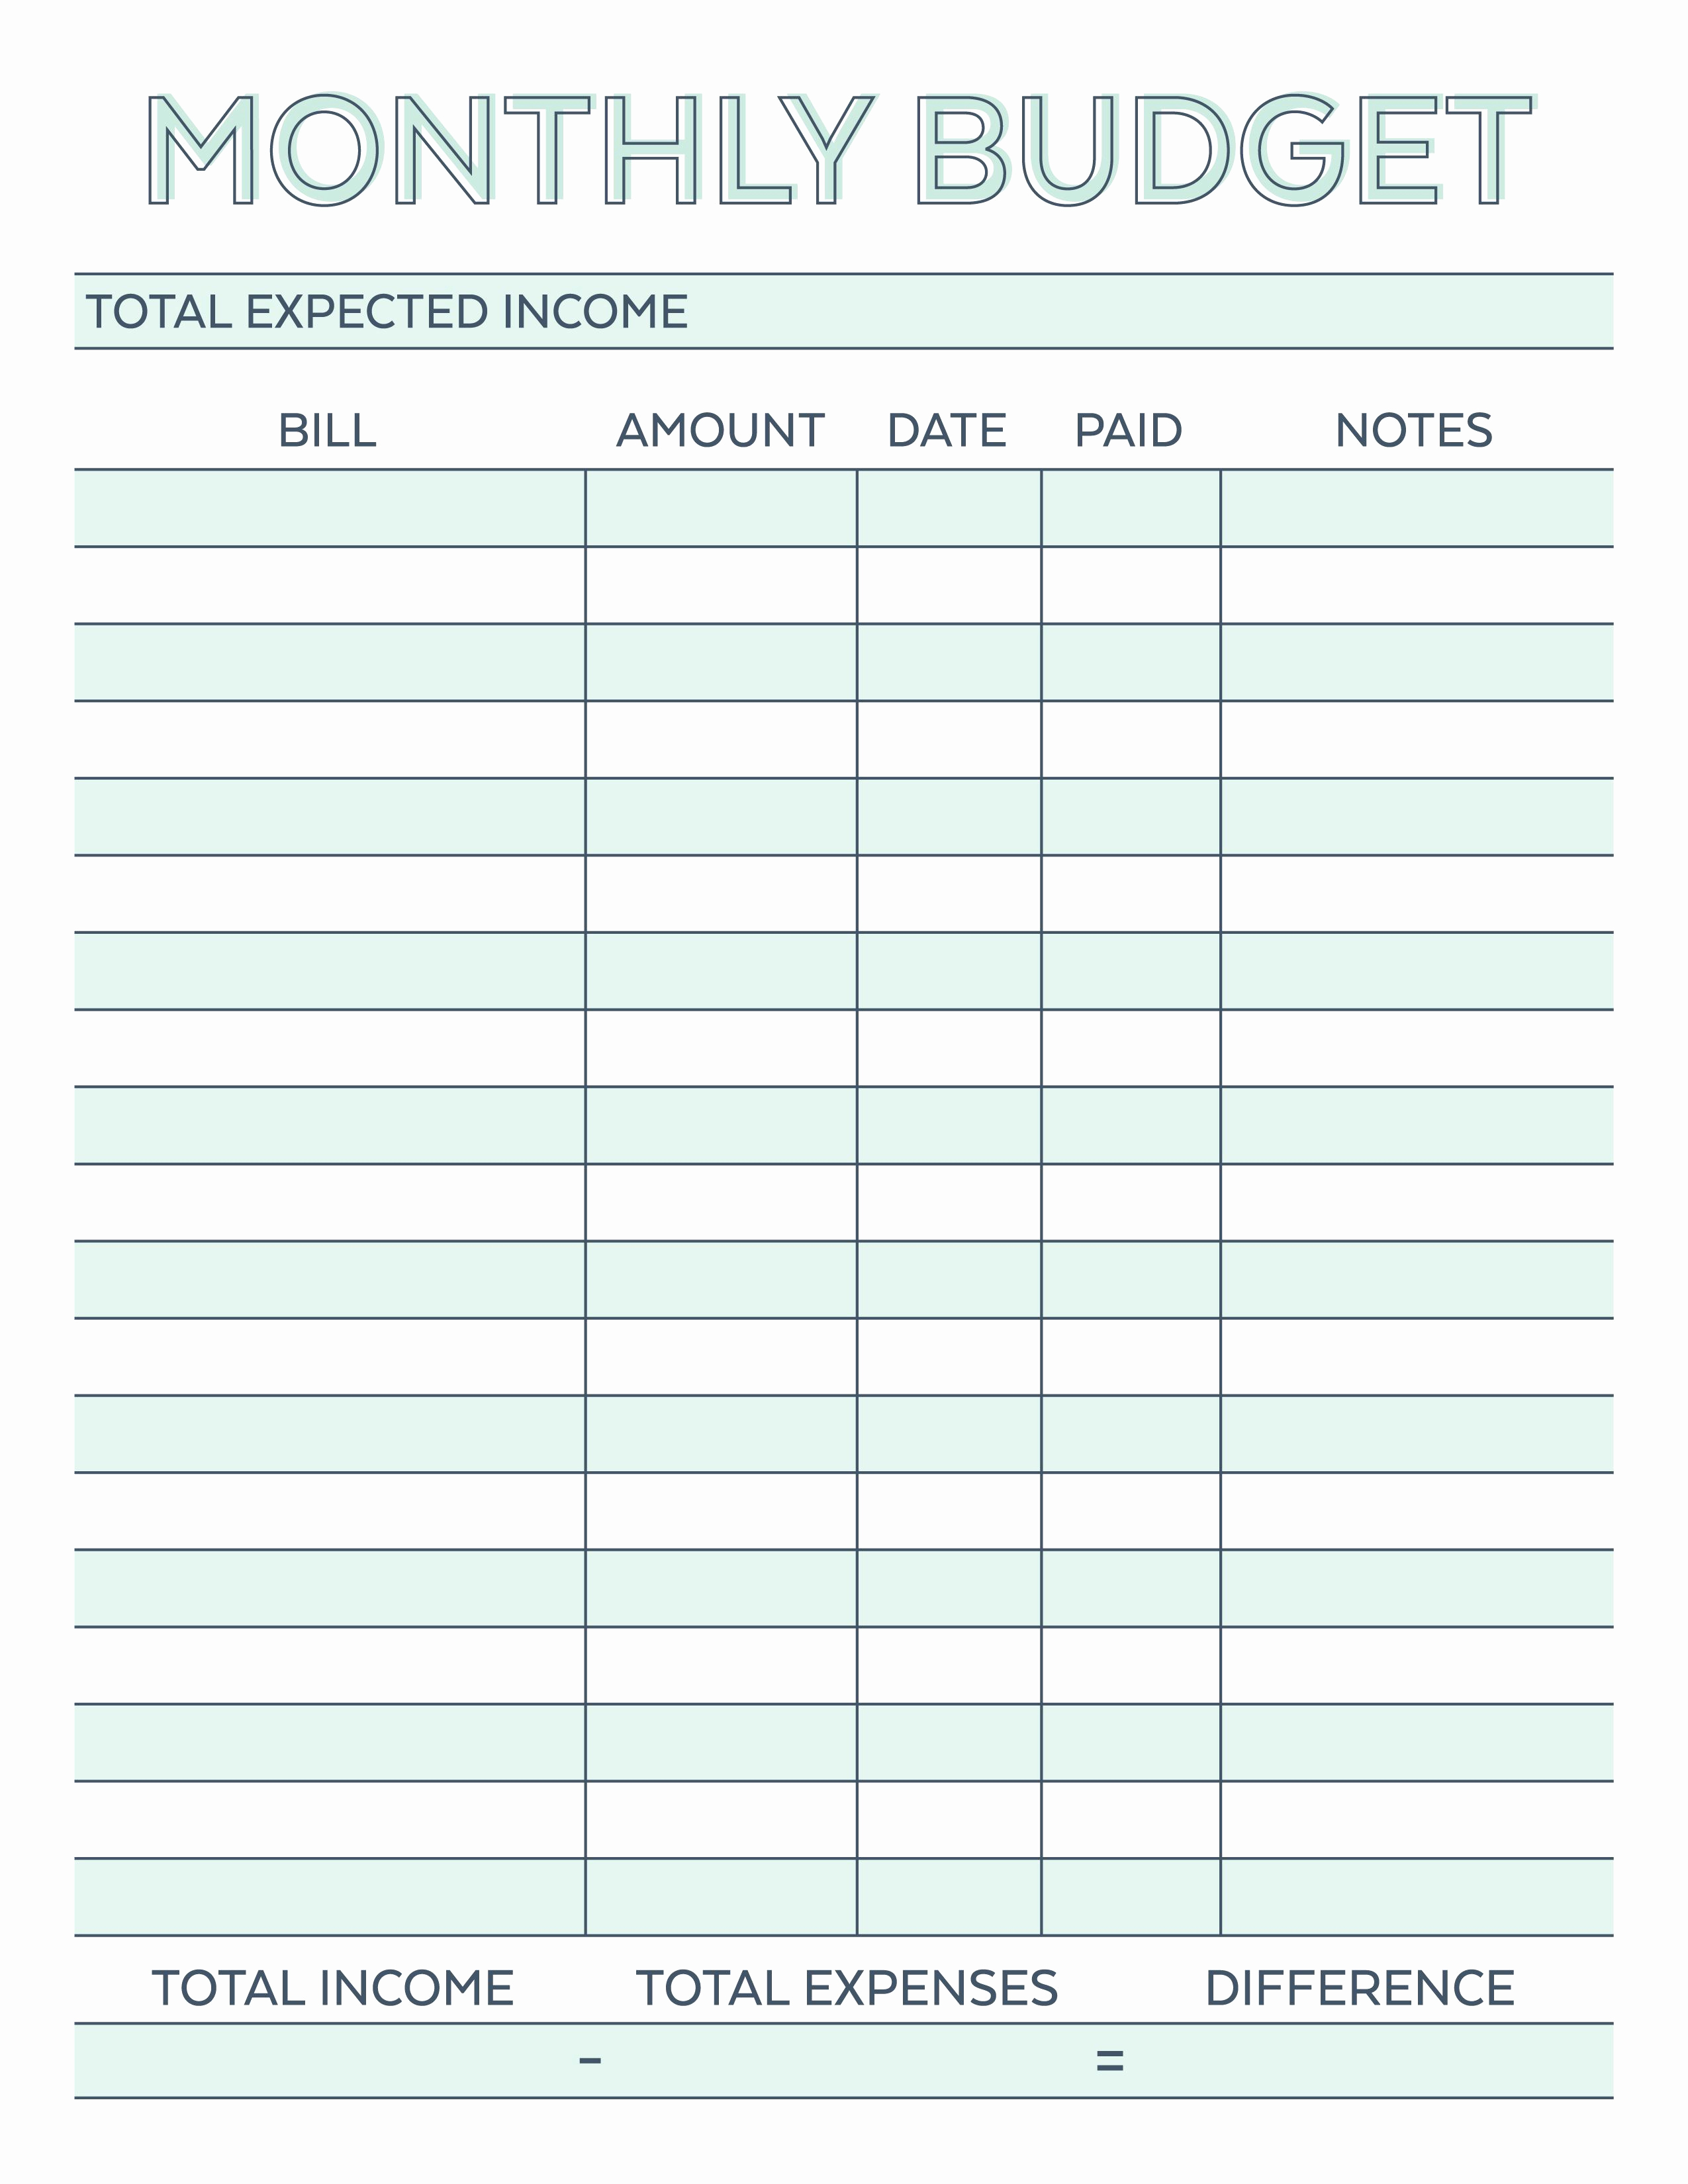 Monthly Budget Spreadsheet Template Inspirational Pin by Melody Vliem On Printables